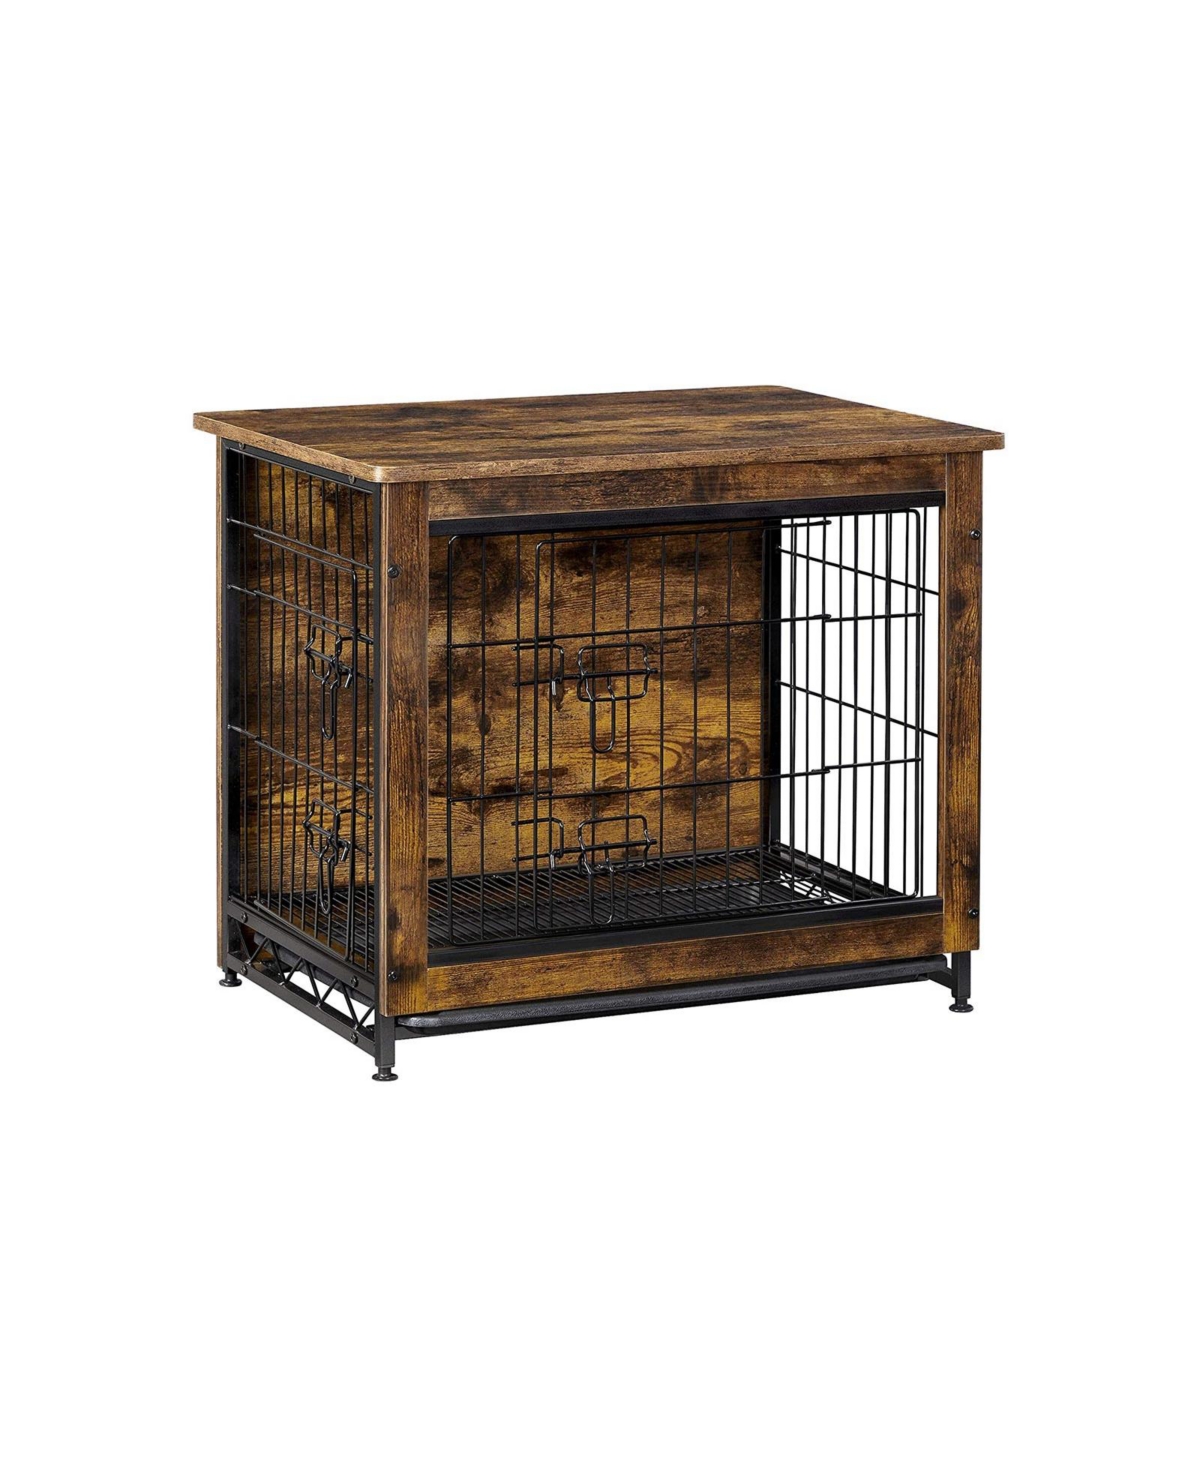 Wooden Dog Crate, Indoor Pet Crate End Table, Dog Furniture With Removable Tray - Greige